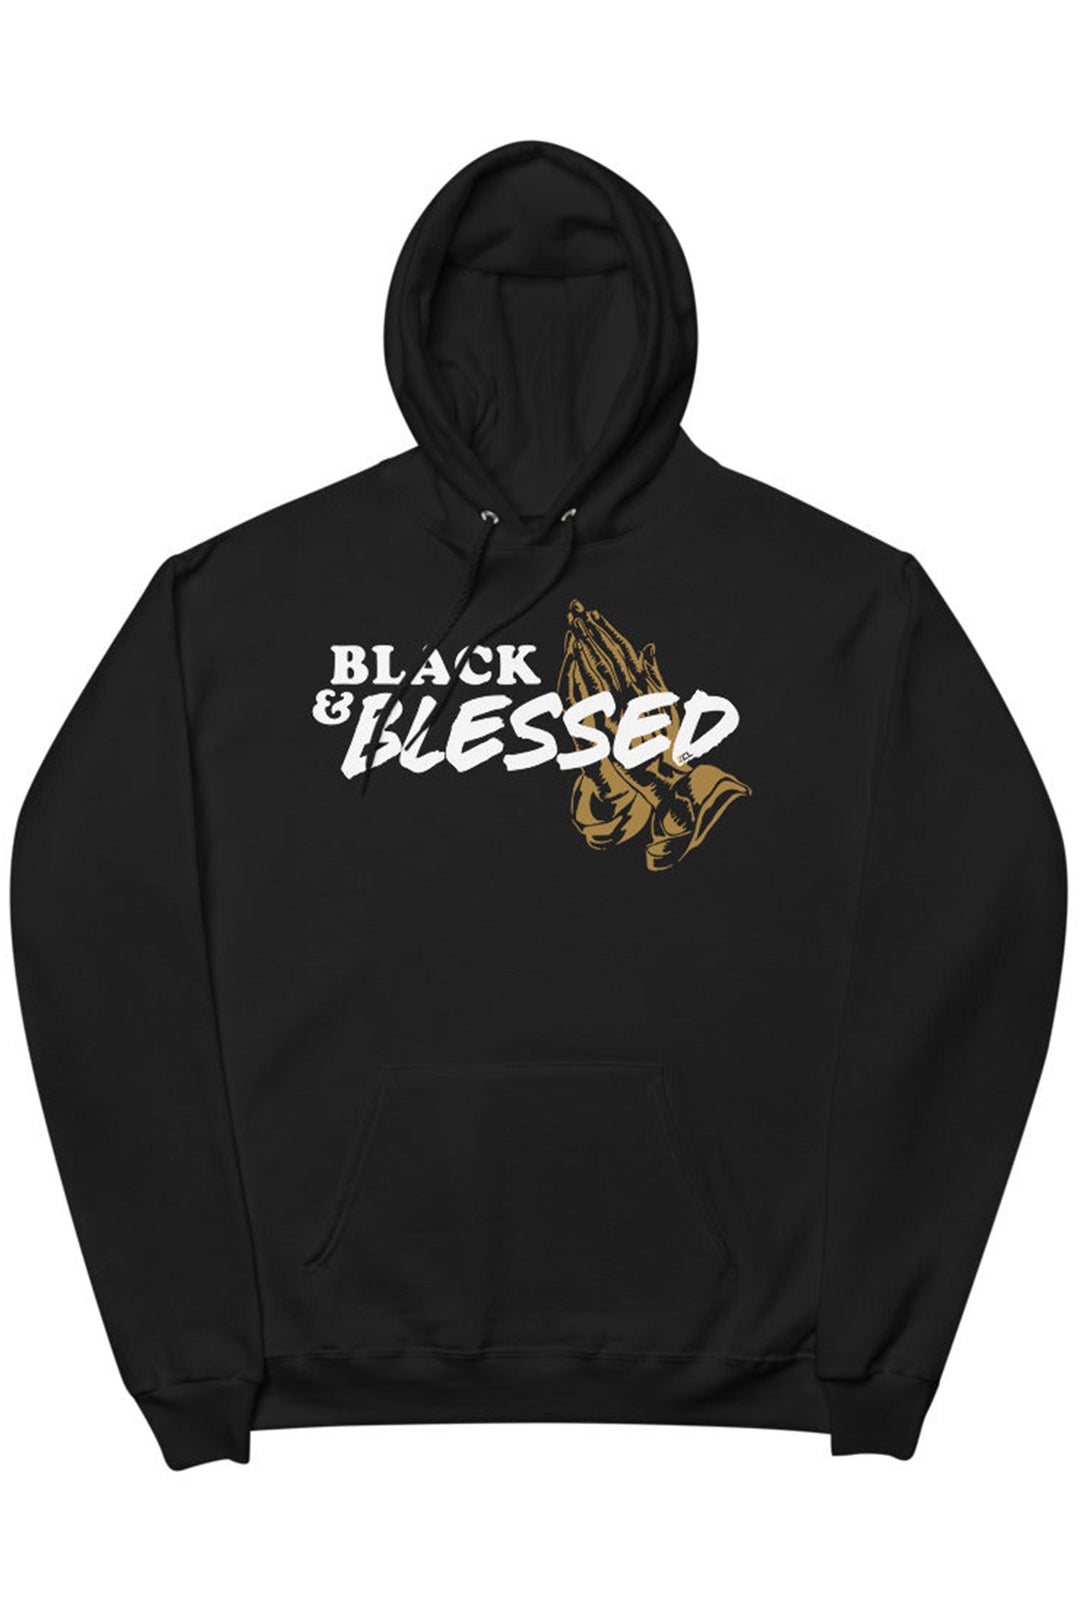 Black & Blessed Hoodie (Classic) - Zamage